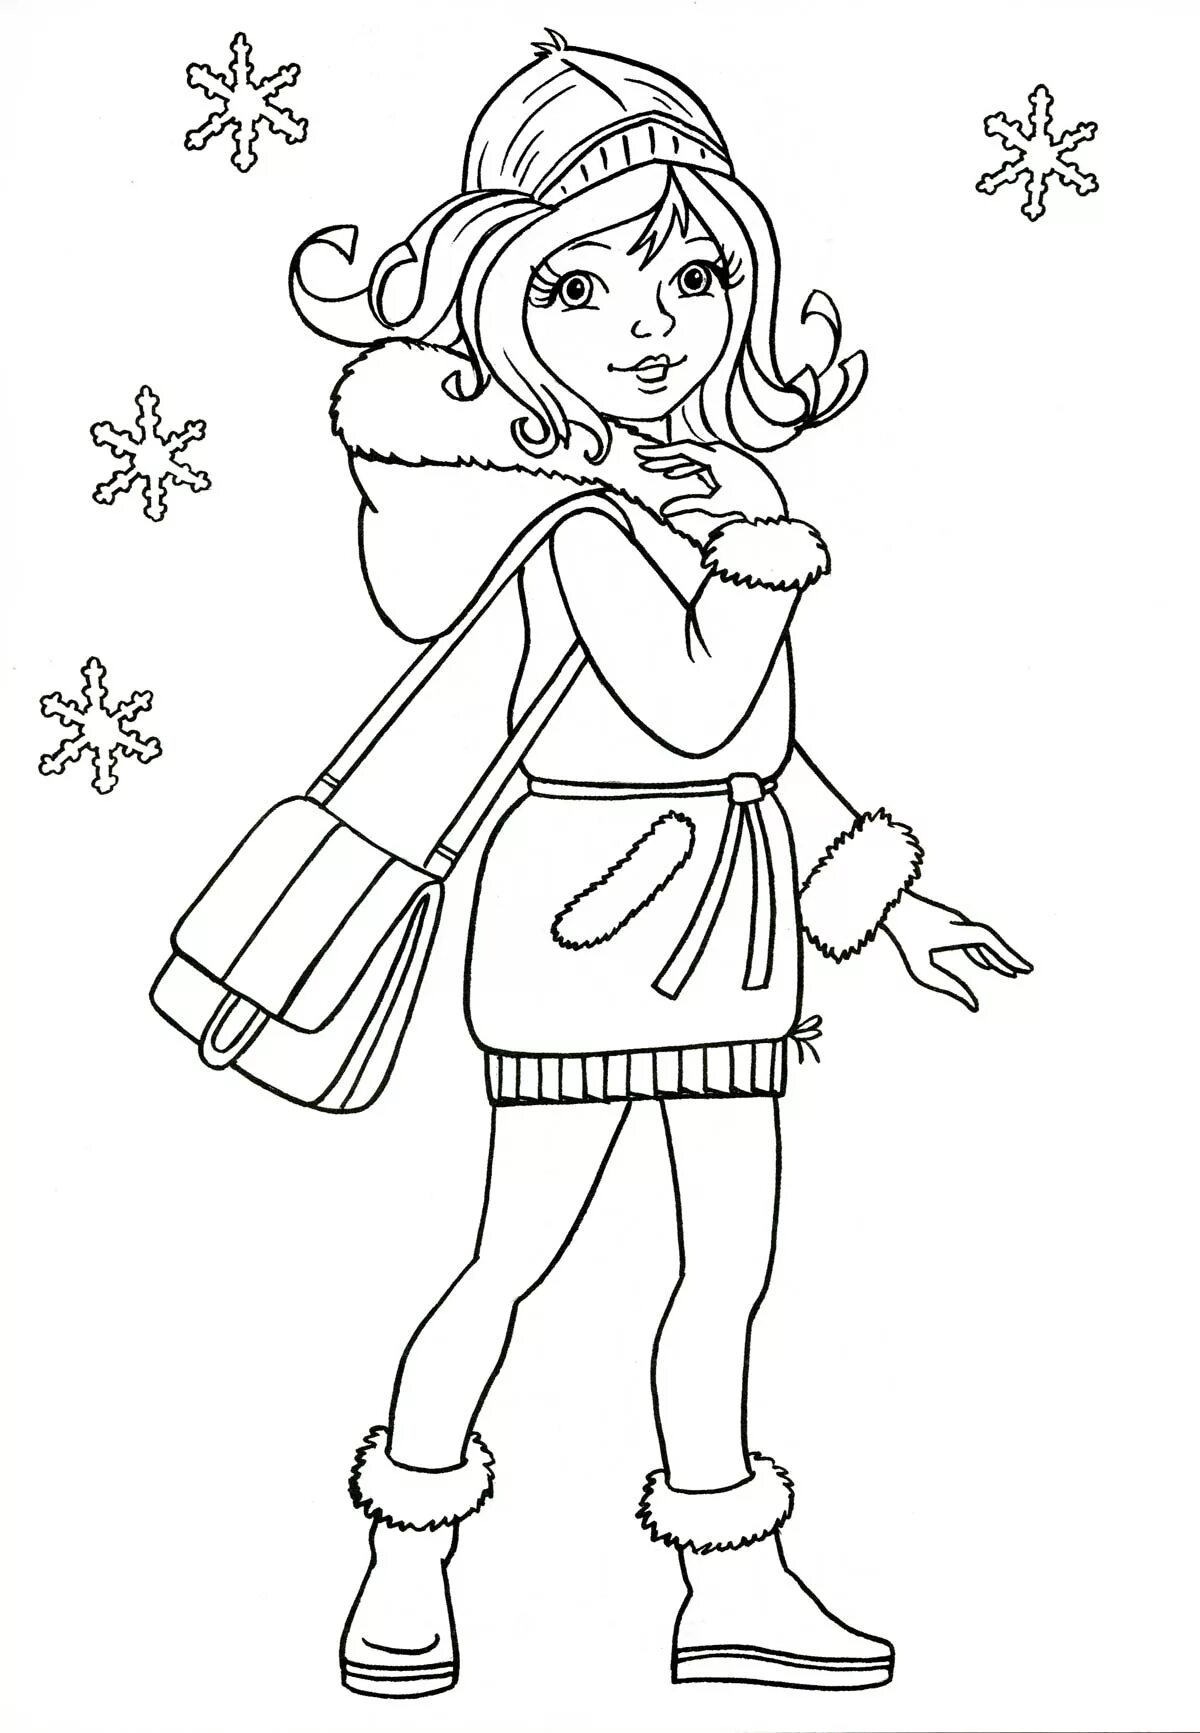 Peace coloring for girls winter